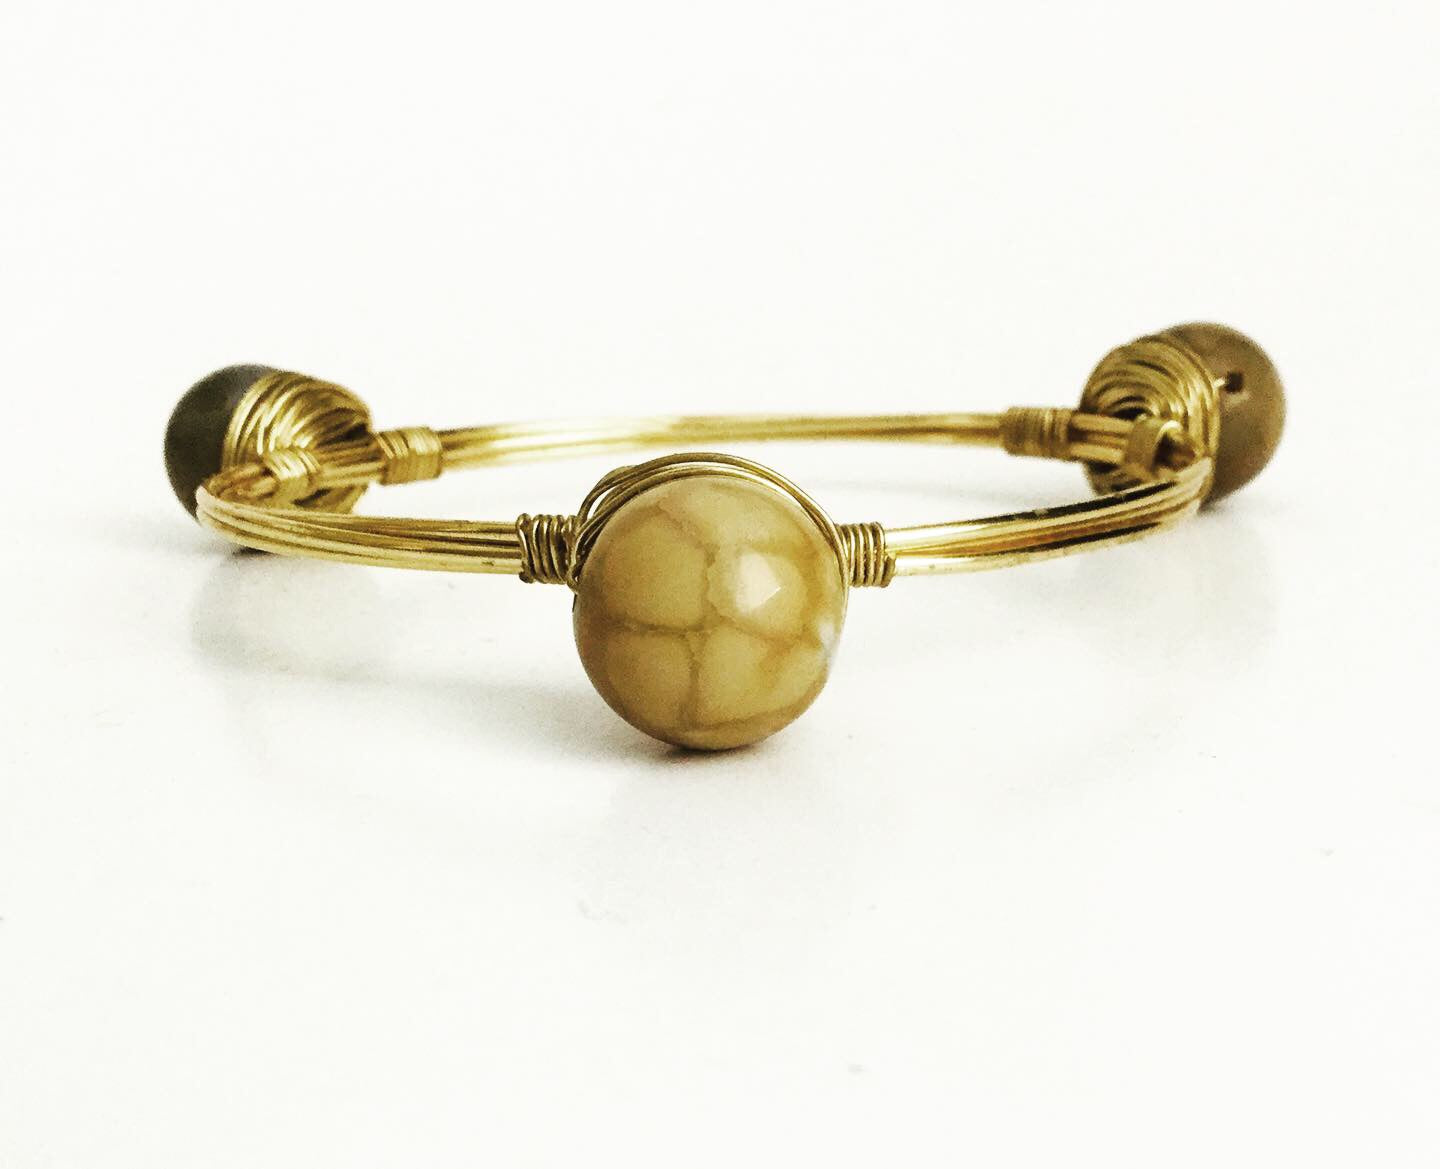 The BOBBY Bangle with Organic Agate Beads